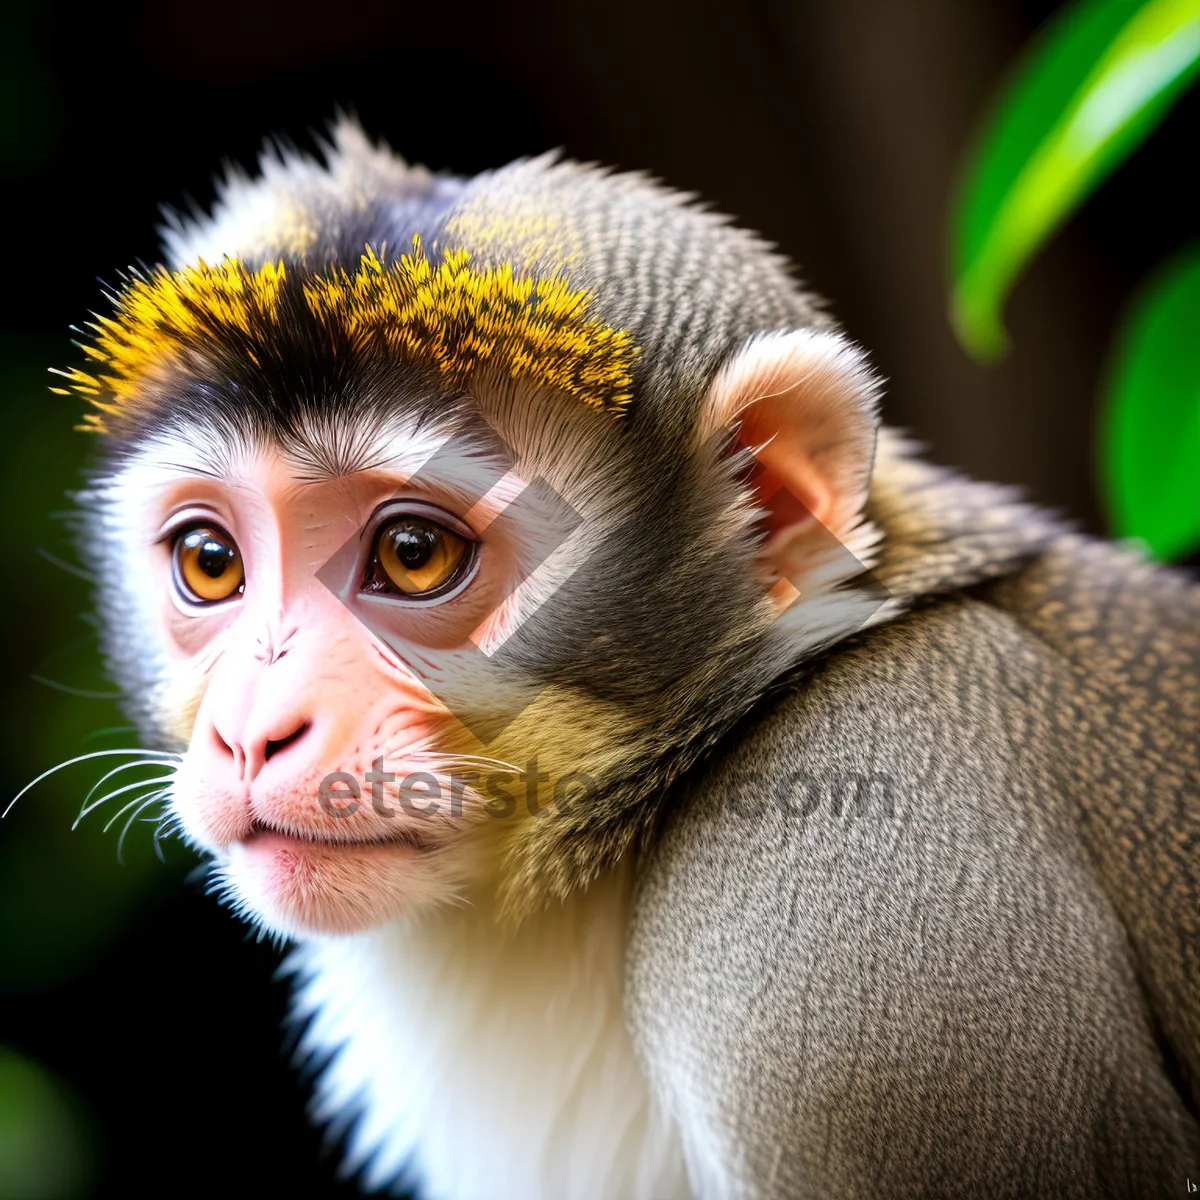 Picture of Cute Macaque Monkey in Wild Jungle